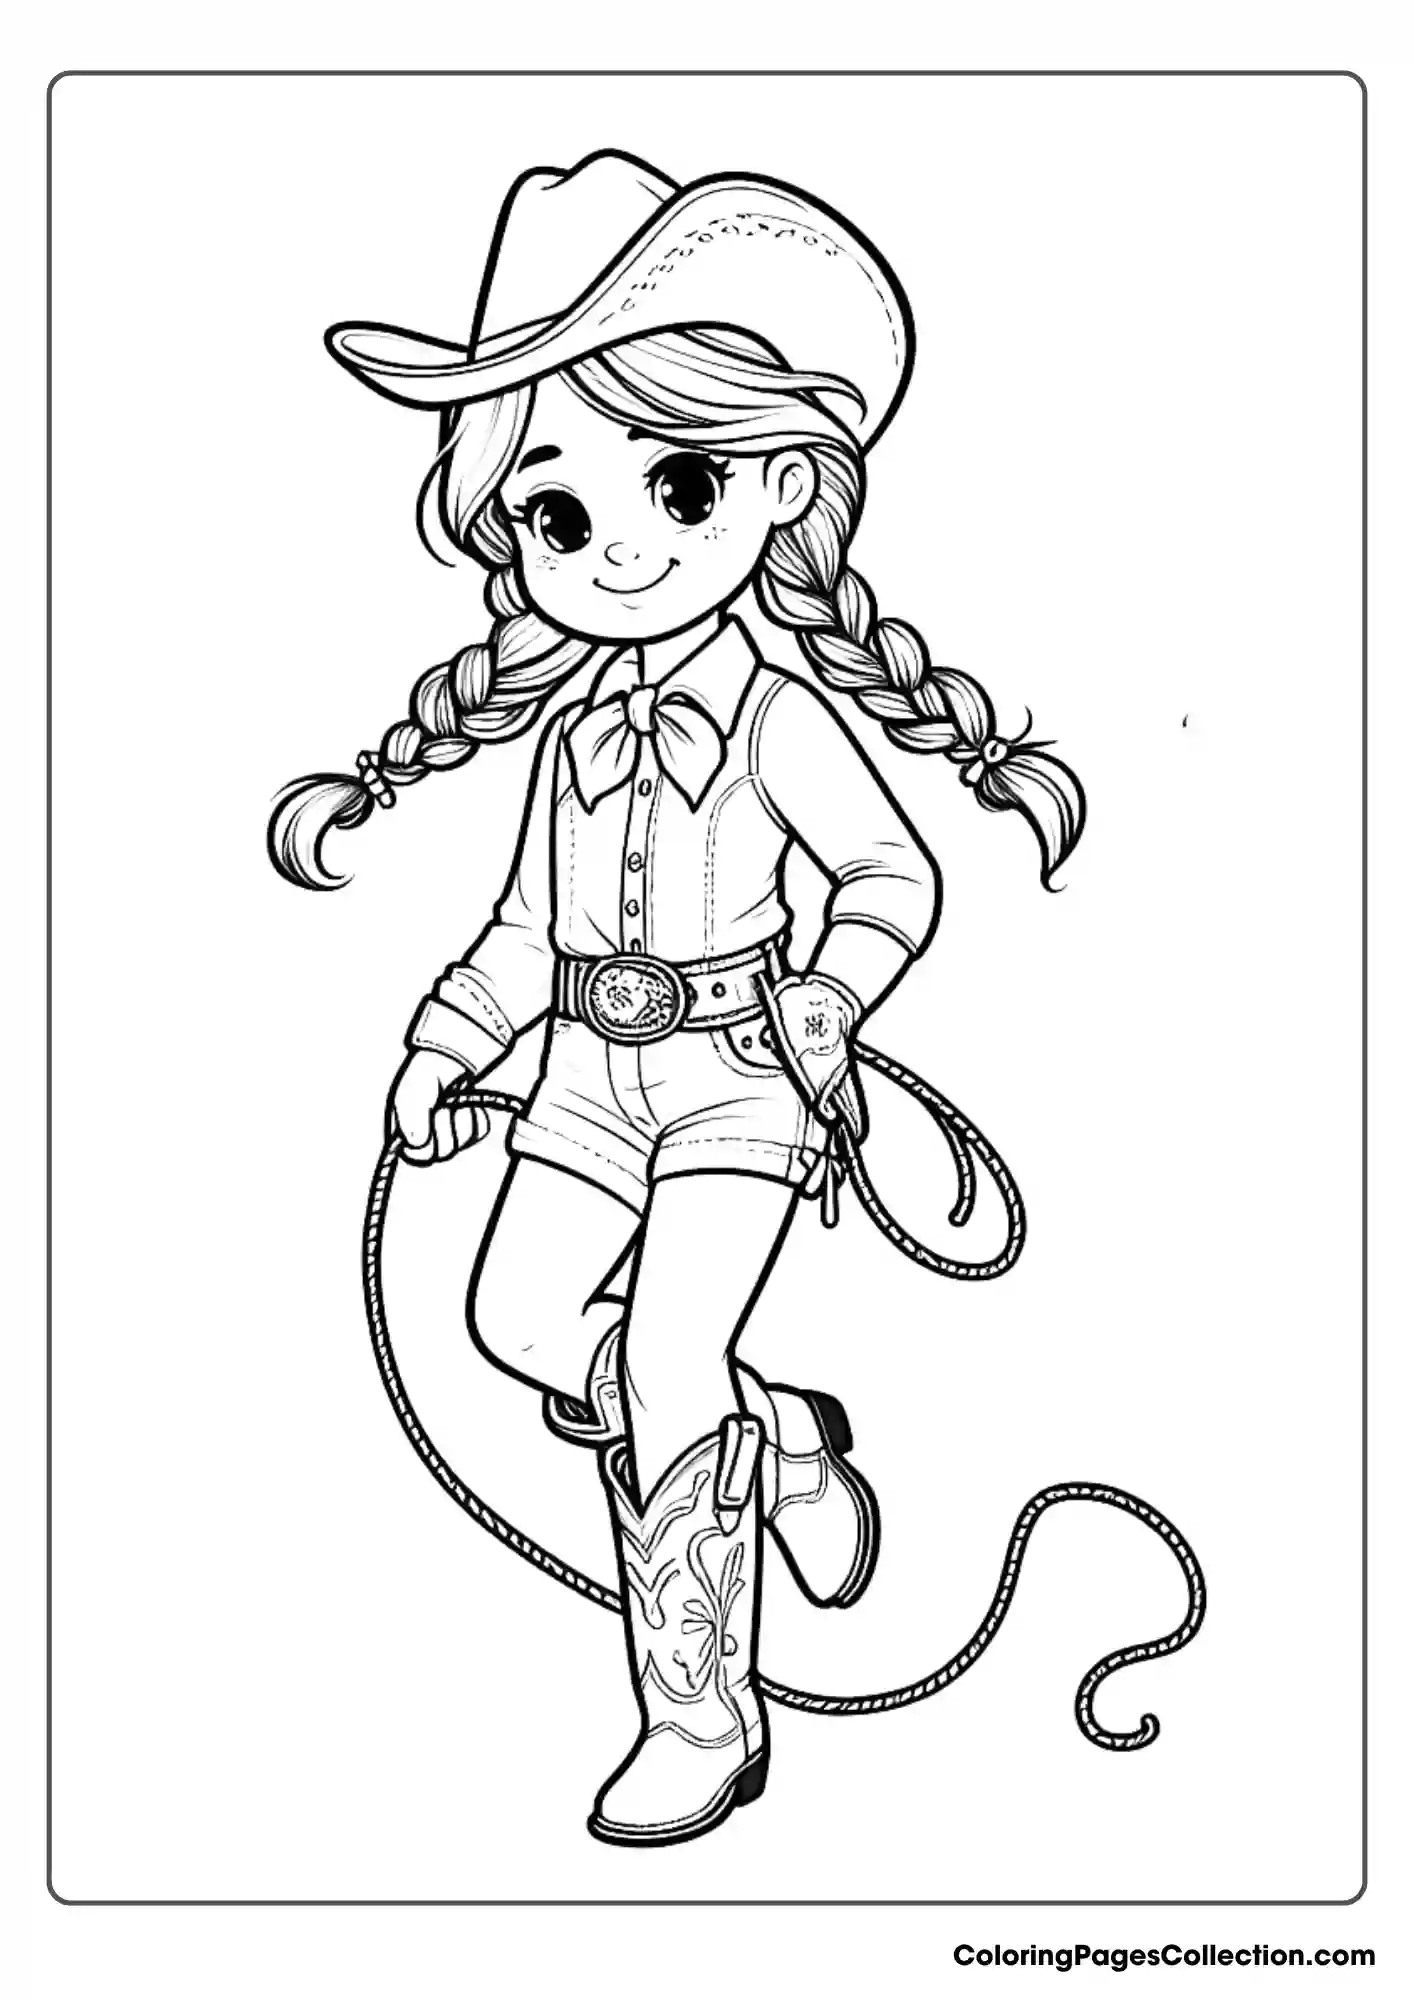 Cowgirl Coloring Pages For Kids